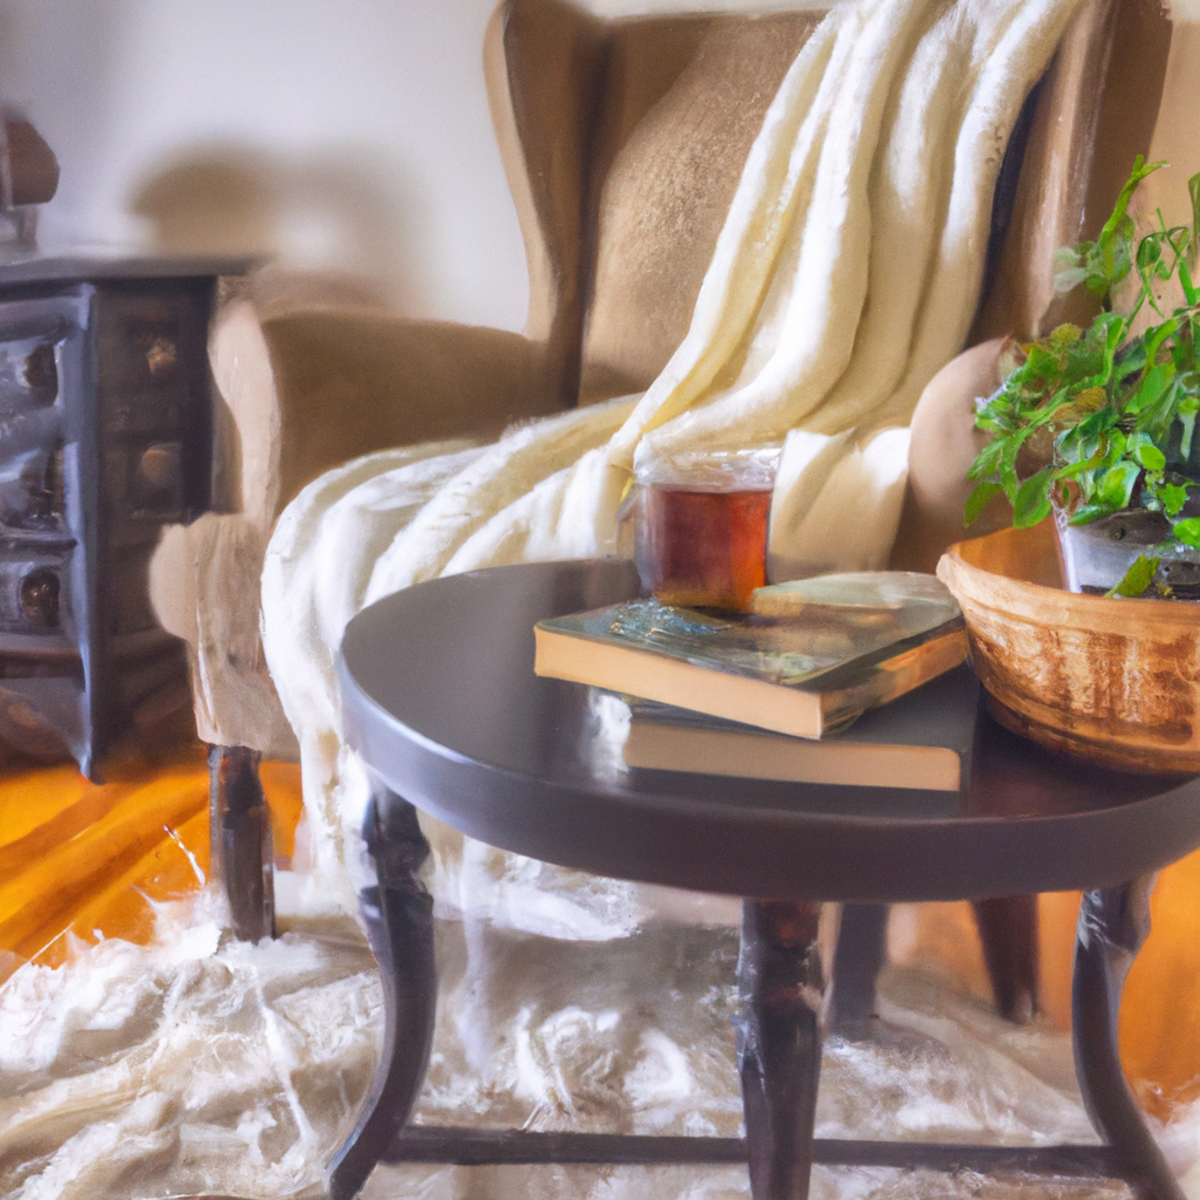 Cozy living room with warm lighting, tea, books, blanket, armchair, and essential oil diffuser for relaxation and self-care.